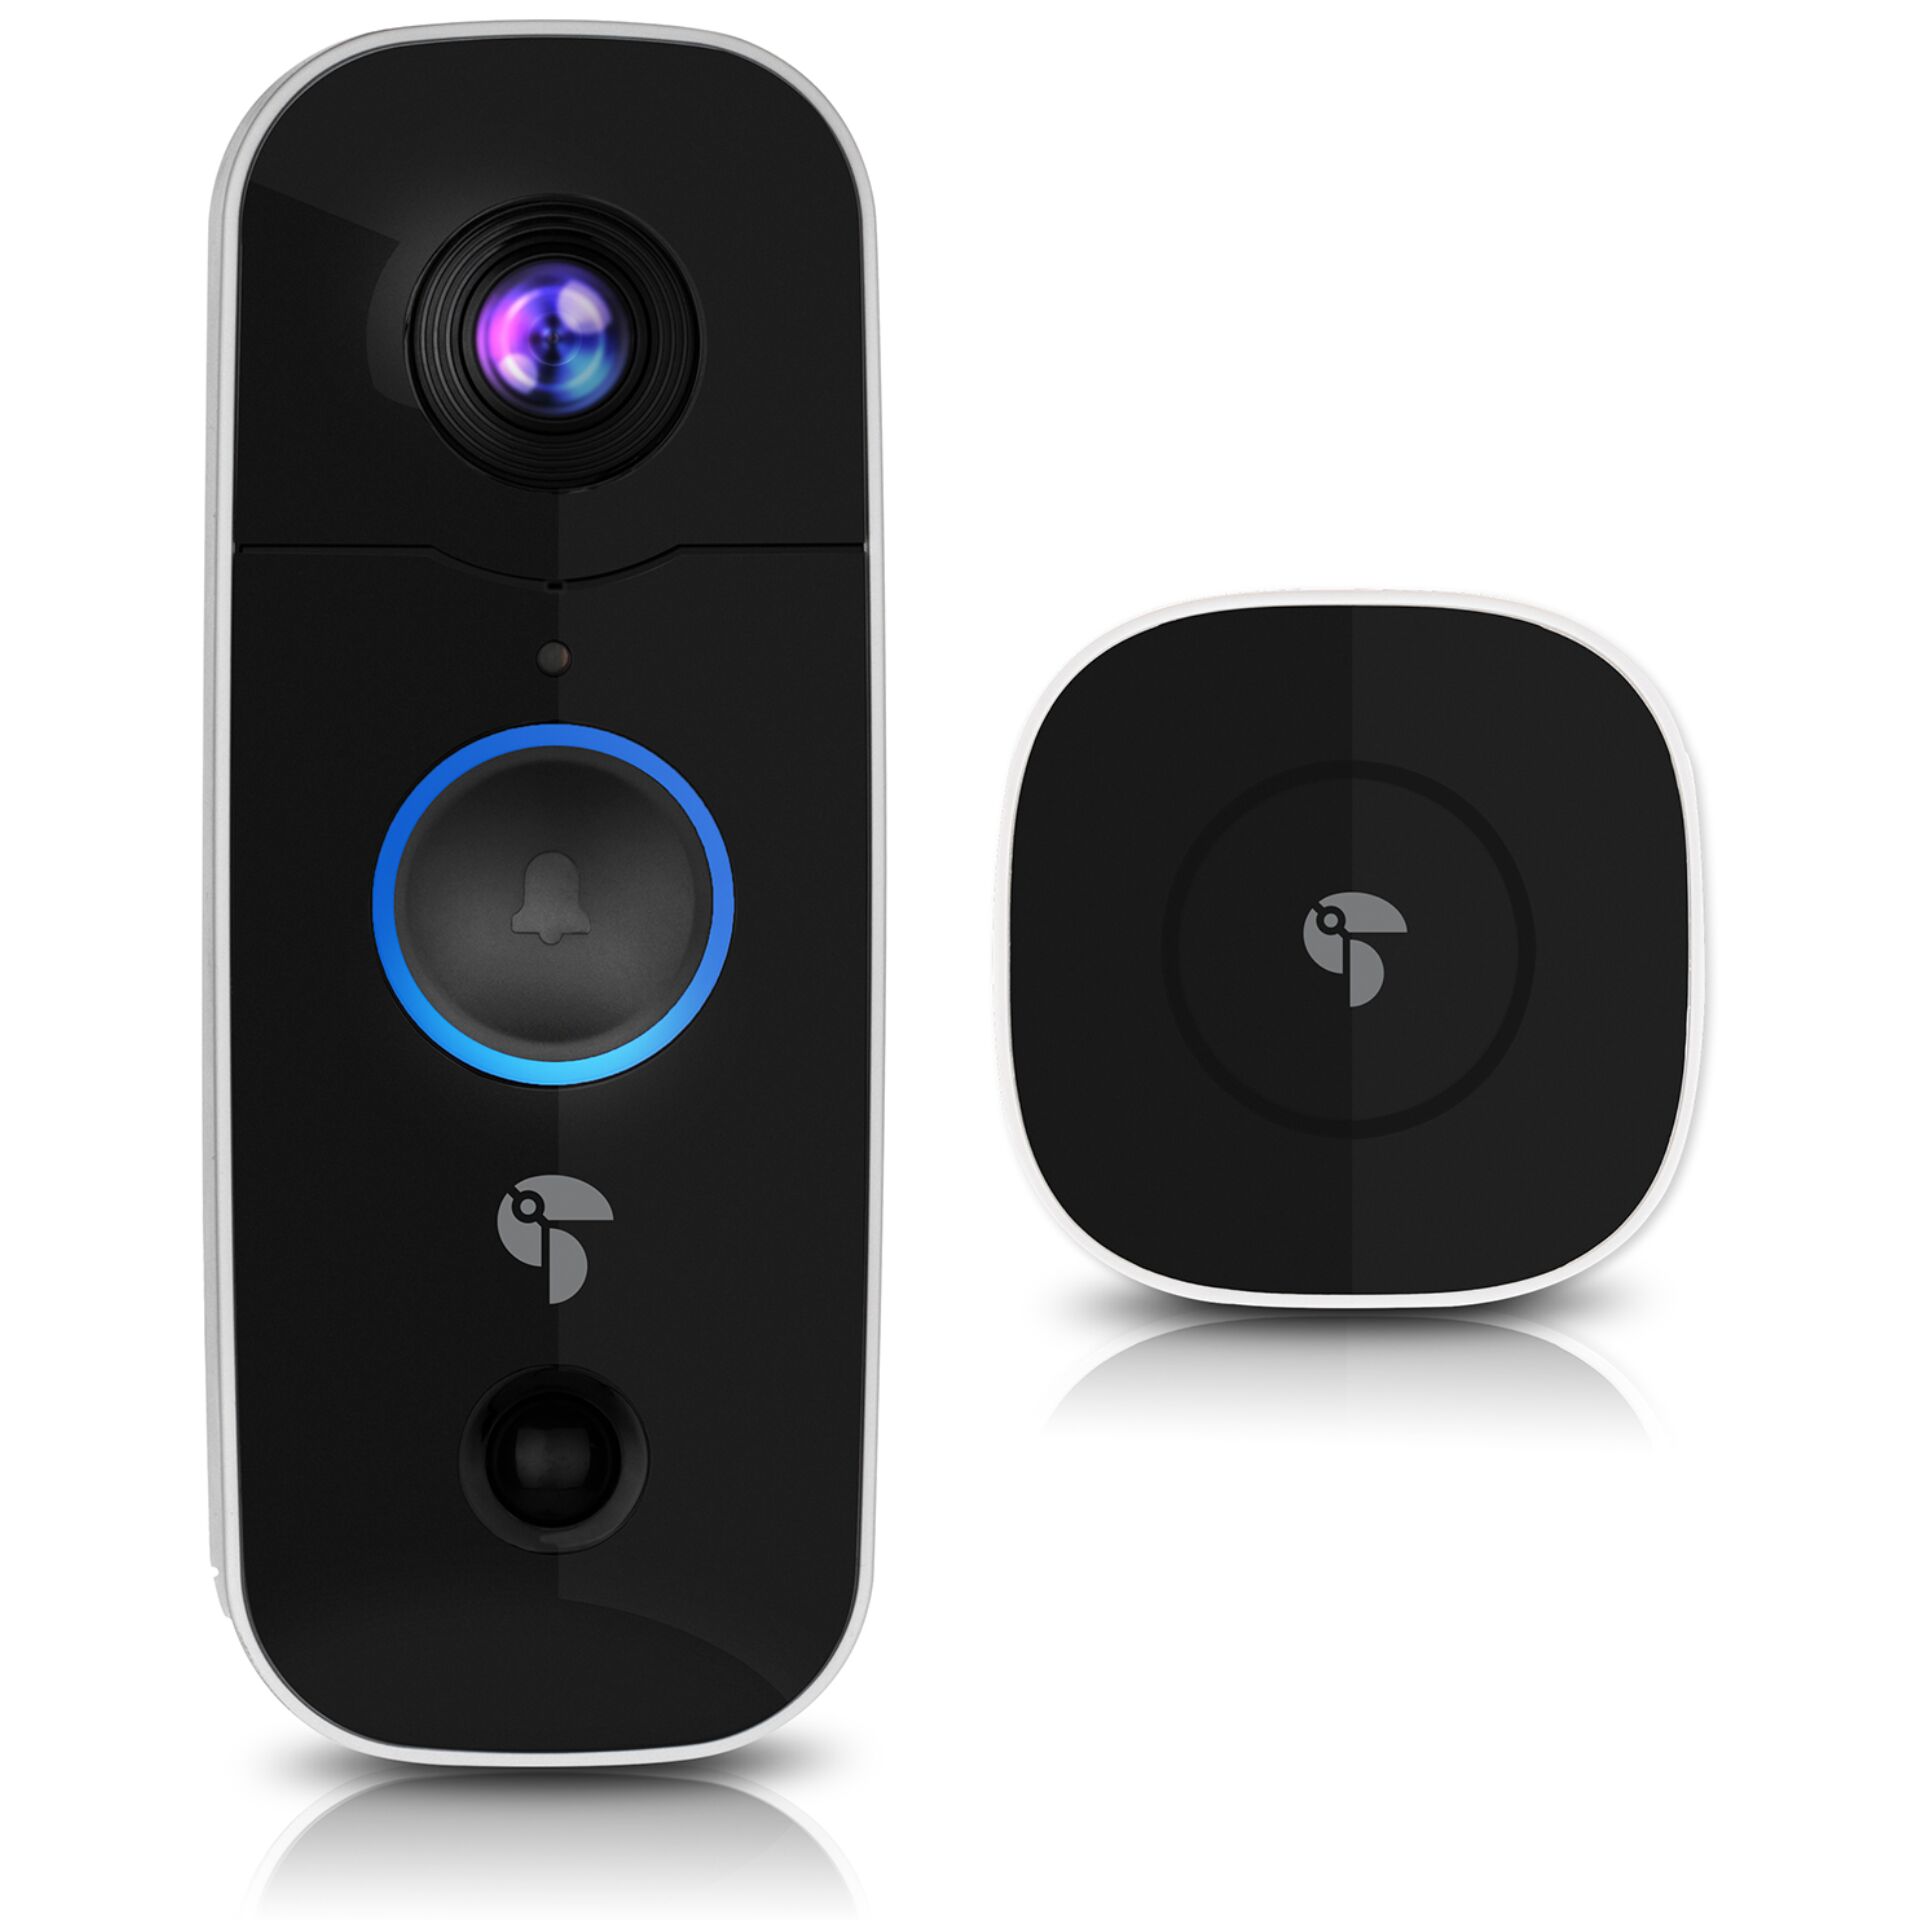 Toucan Wireless Video Doorbell with internal Chime